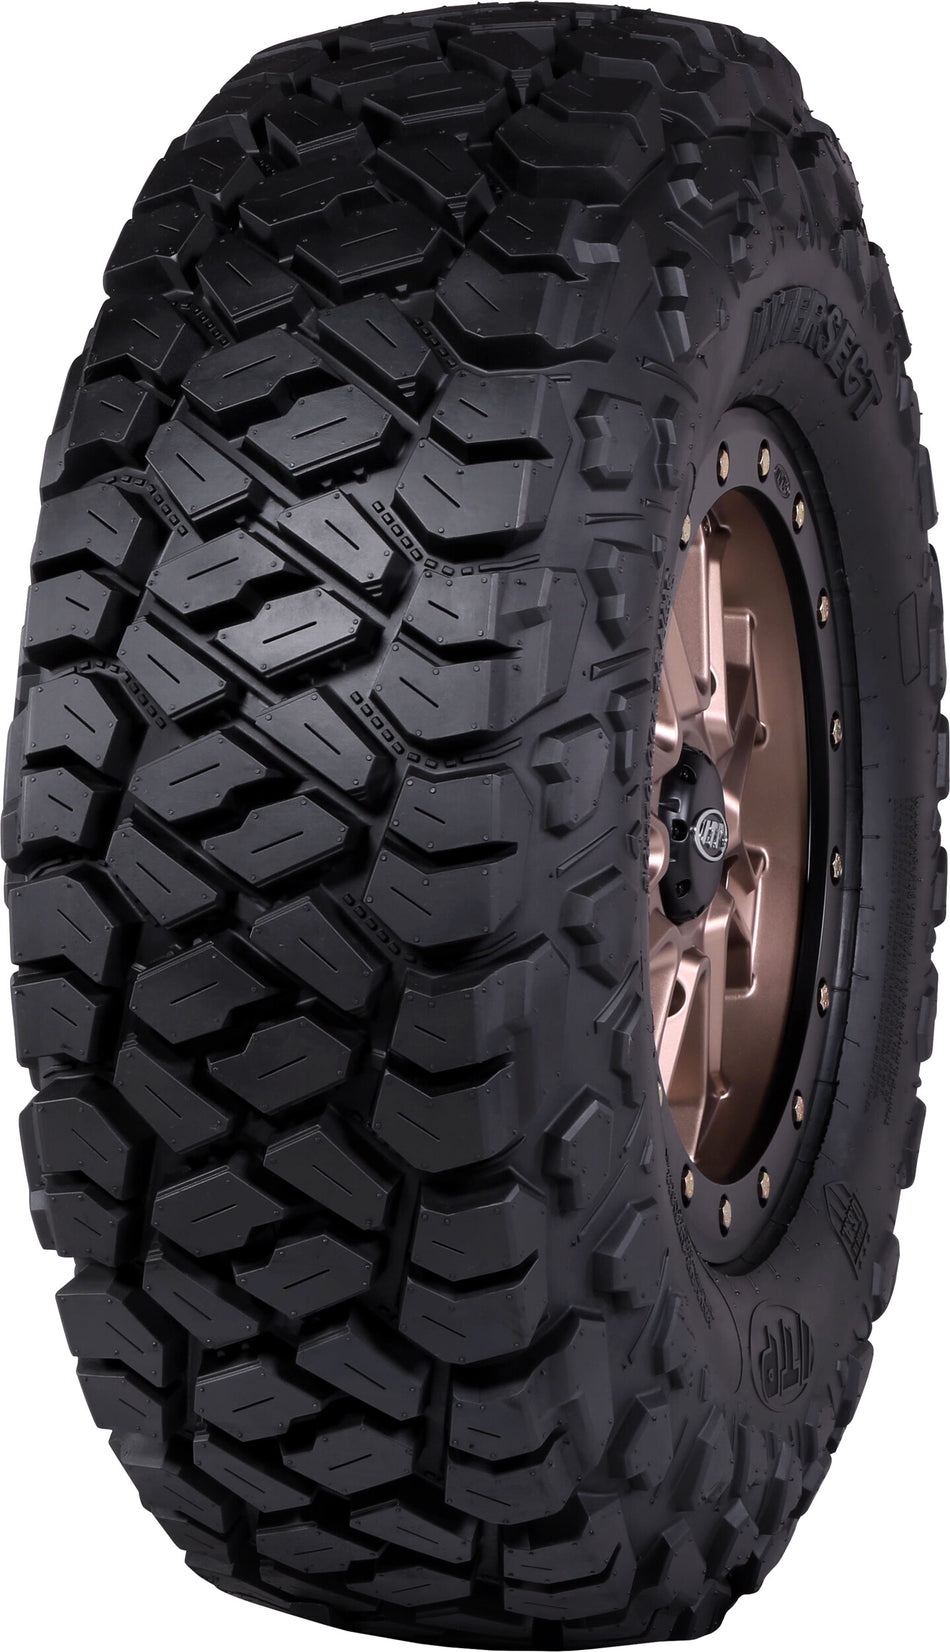 ITPTire Intersect Front/Rear 30x10r15 8-Ply6P1790